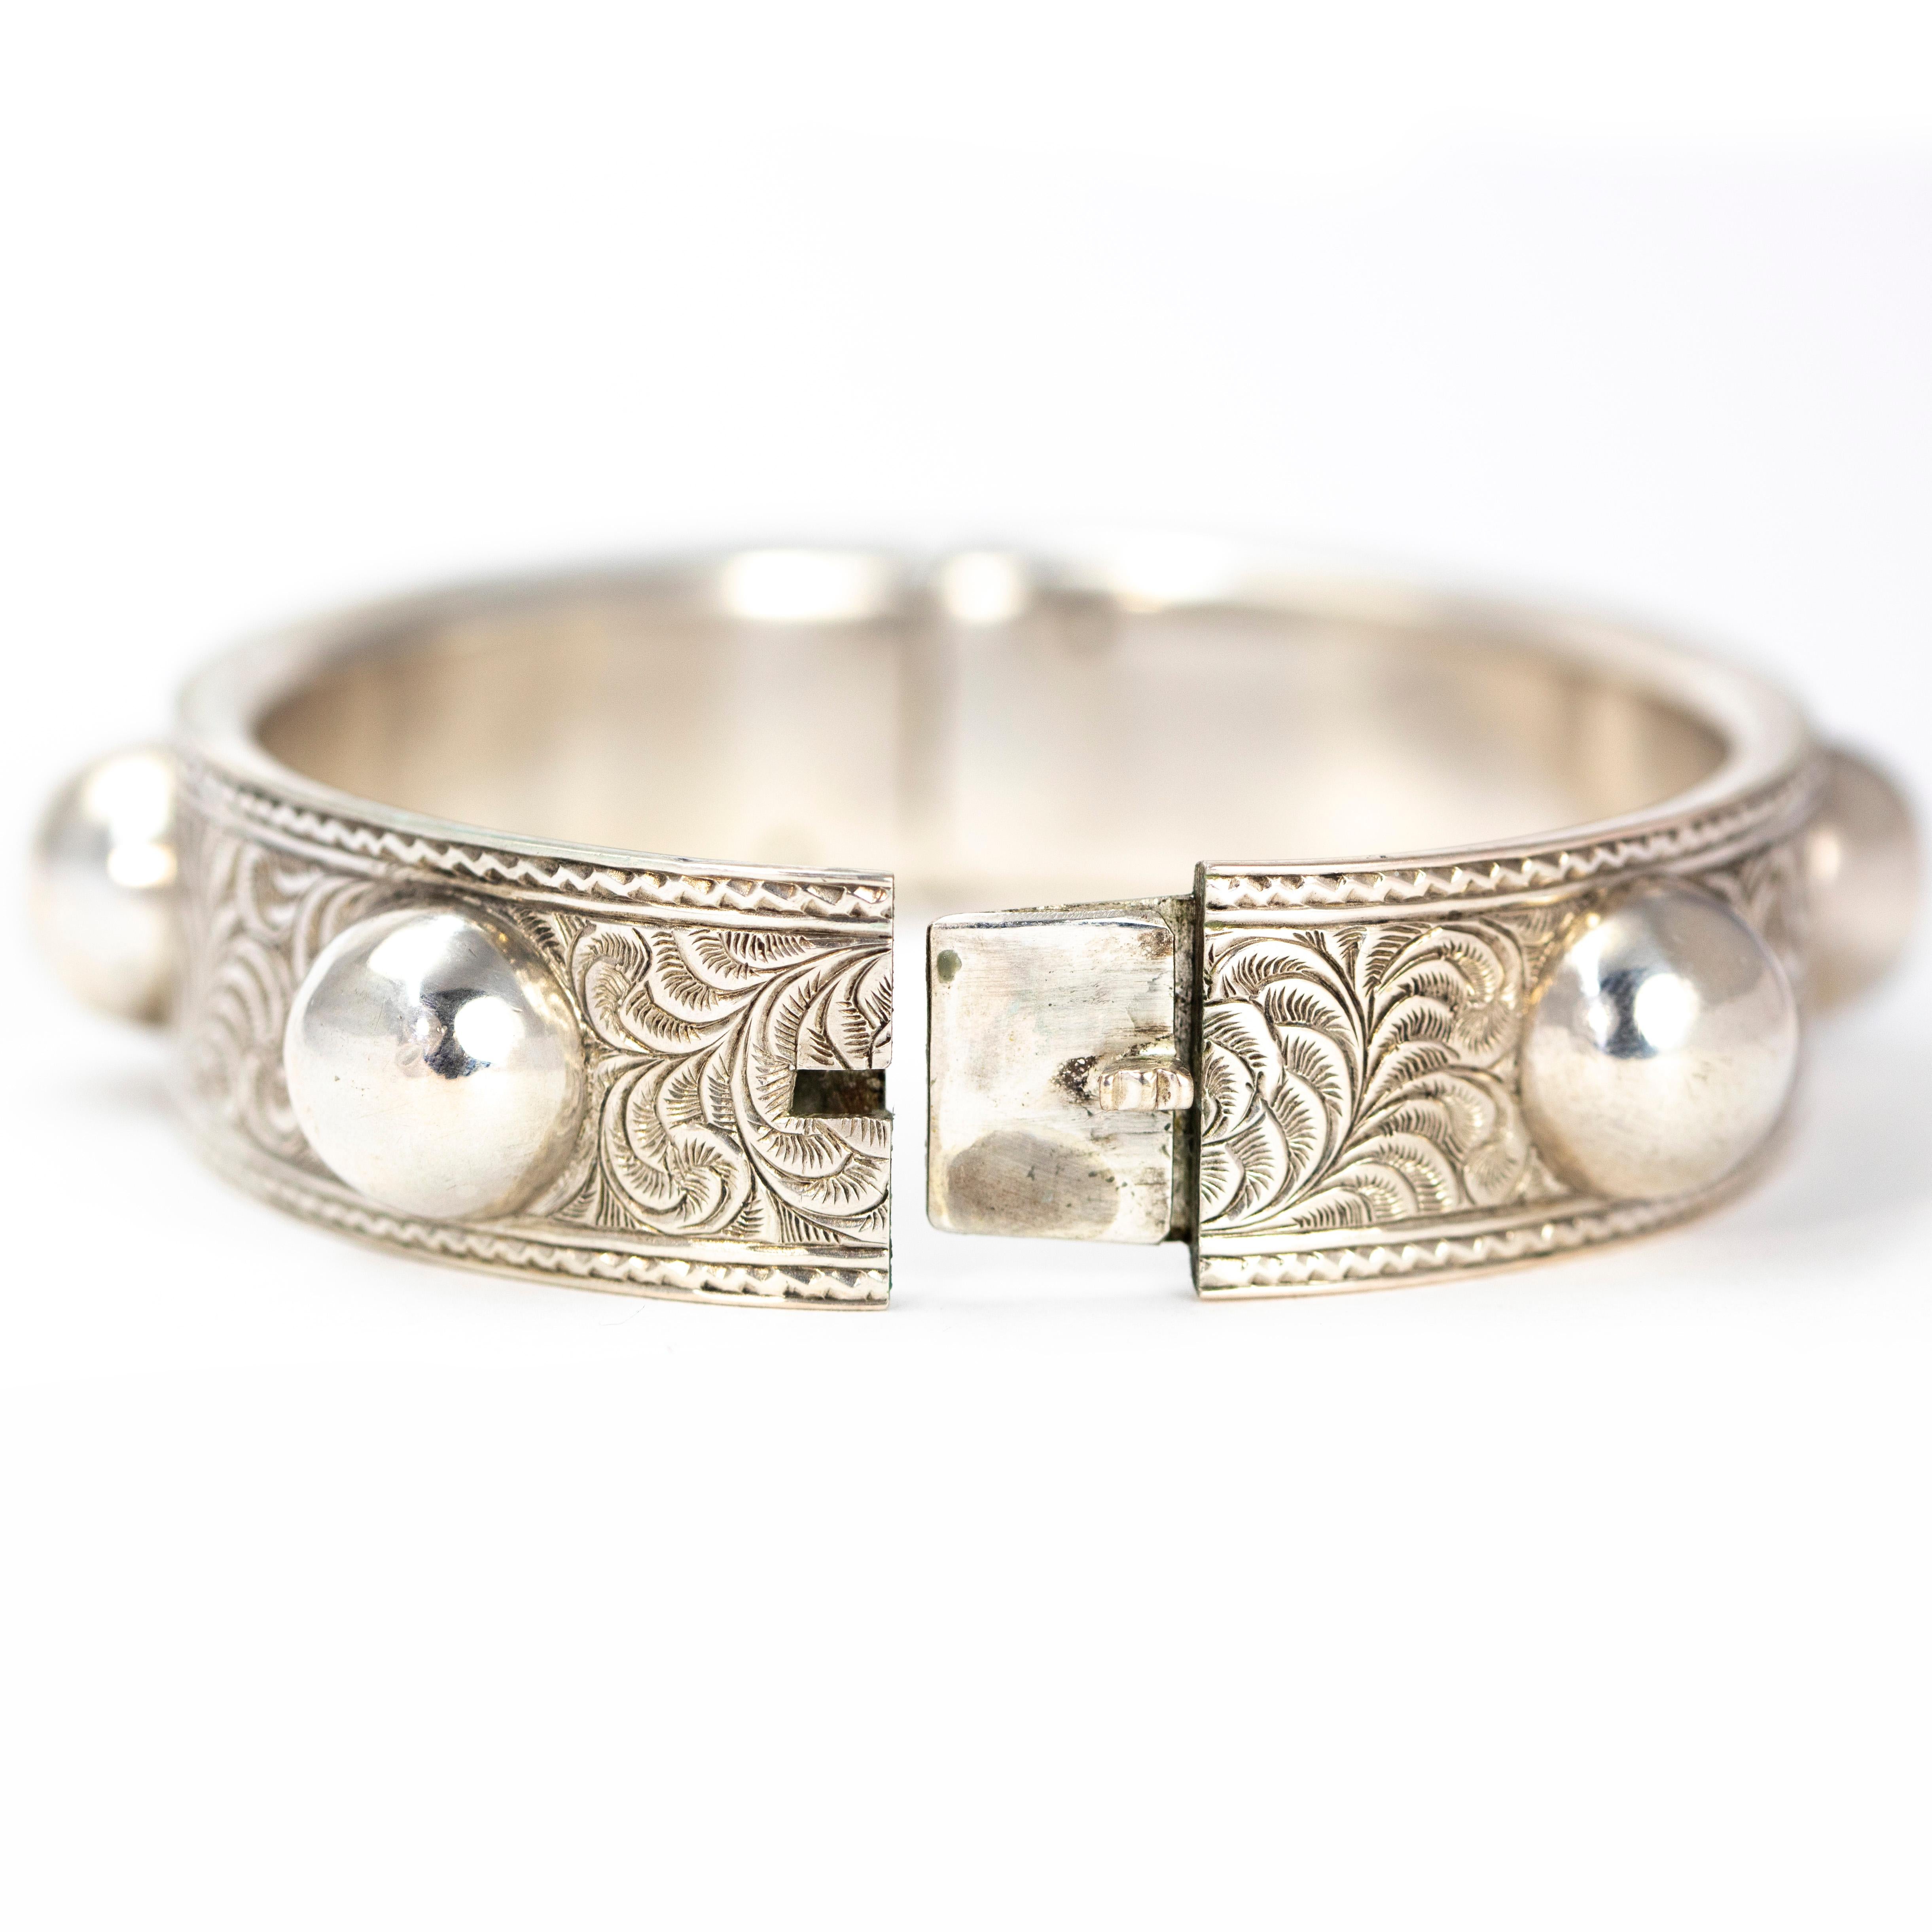 This gorgeous stylish silver bangle has intricate swirl detailing all the way around and also features glossy round orb detail. 

Inner Diameter: 56mm
Band Width: 15.5mm 

Weight: 33g